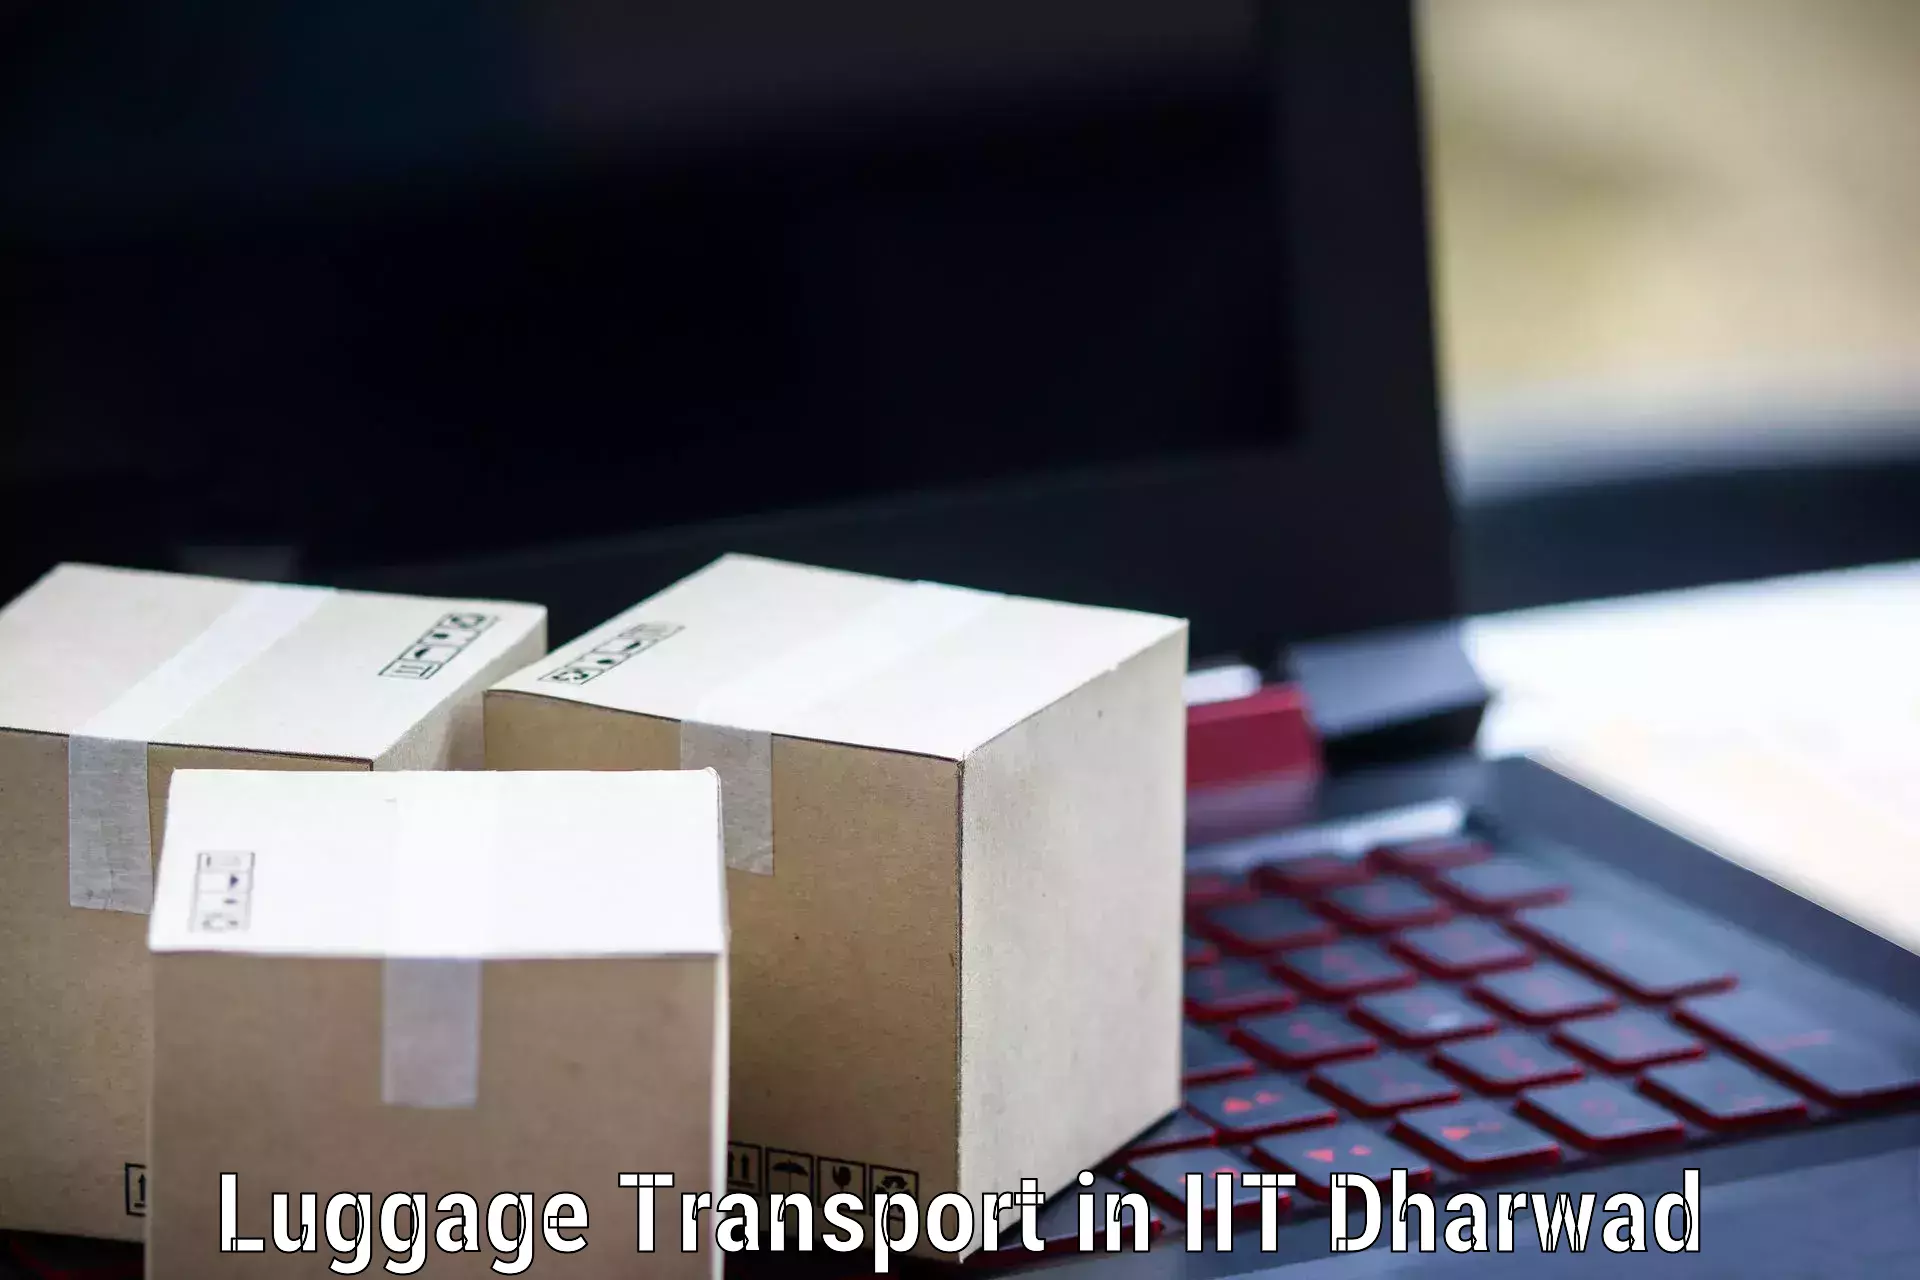 Tailored baggage transport in IIT Dharwad